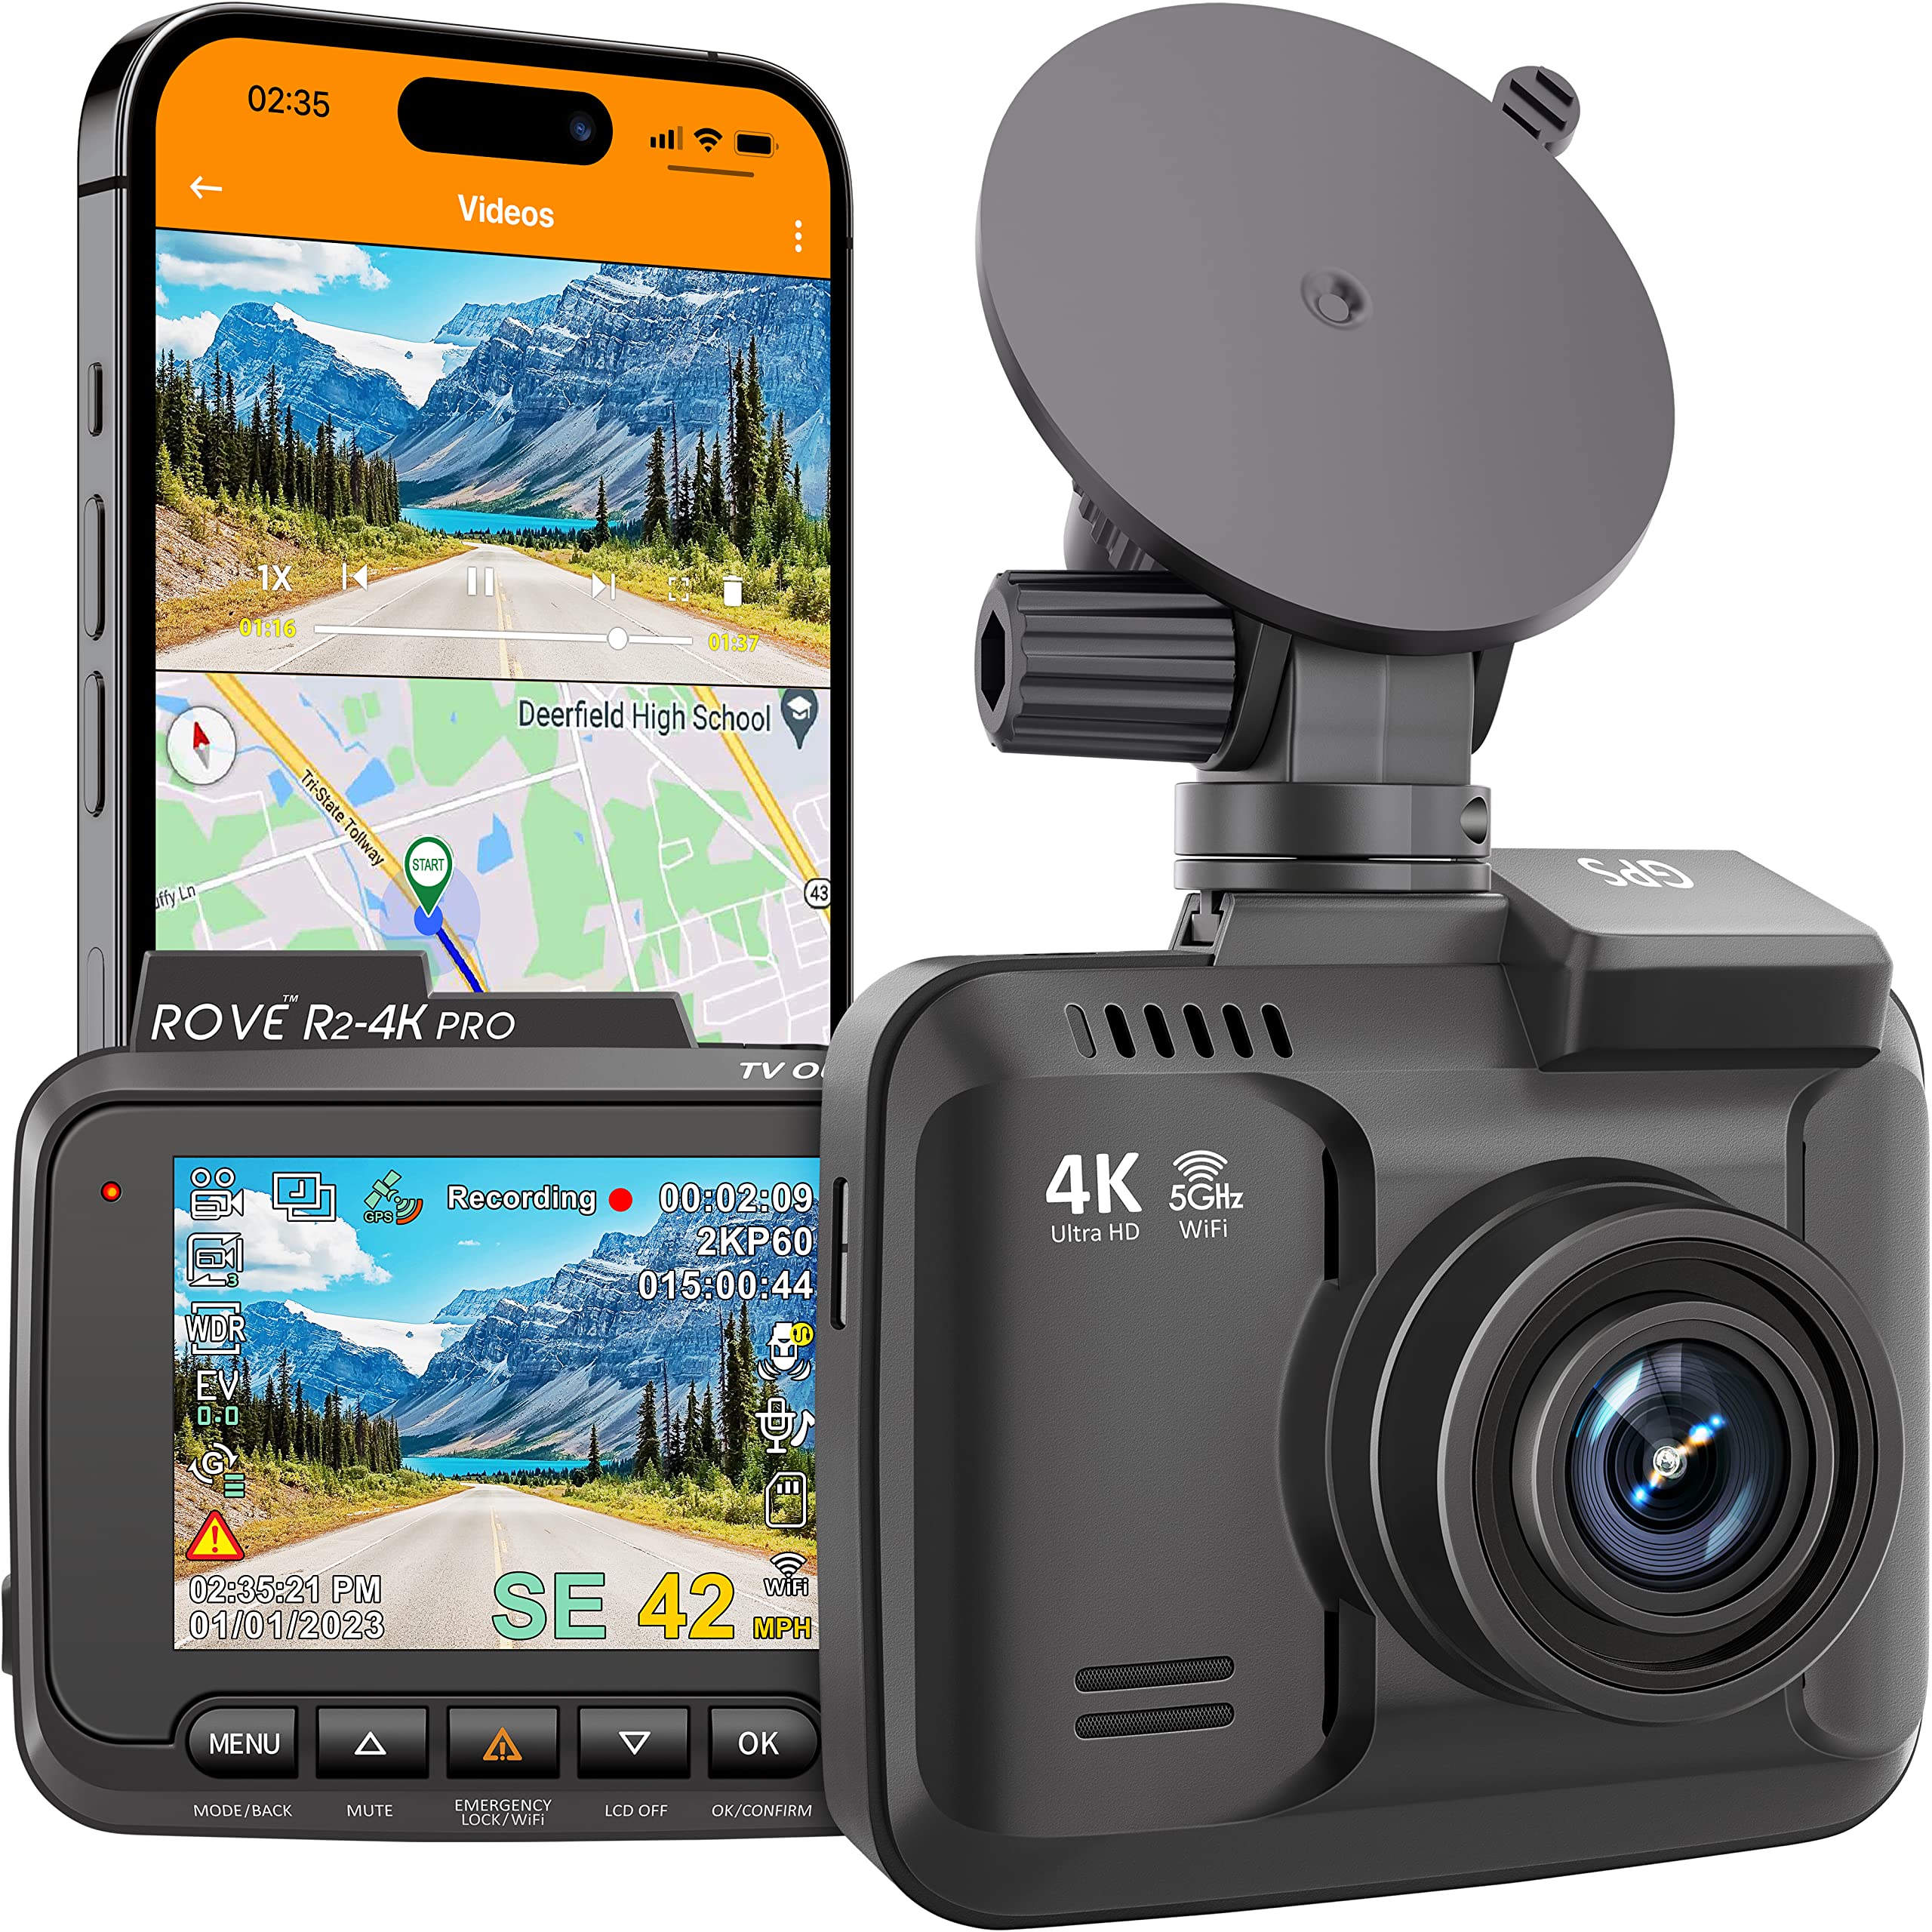  ROVE R2-4K PRO Dash Cam, Built-in GPS, 5G WiFi Dash Camera for  Cars, 2160P UHD 30fps Dashcam with APP, 2.4 IPS Screen, Night Vision, WDR,  150° Wide Angle, 24-Hr Parking Mode